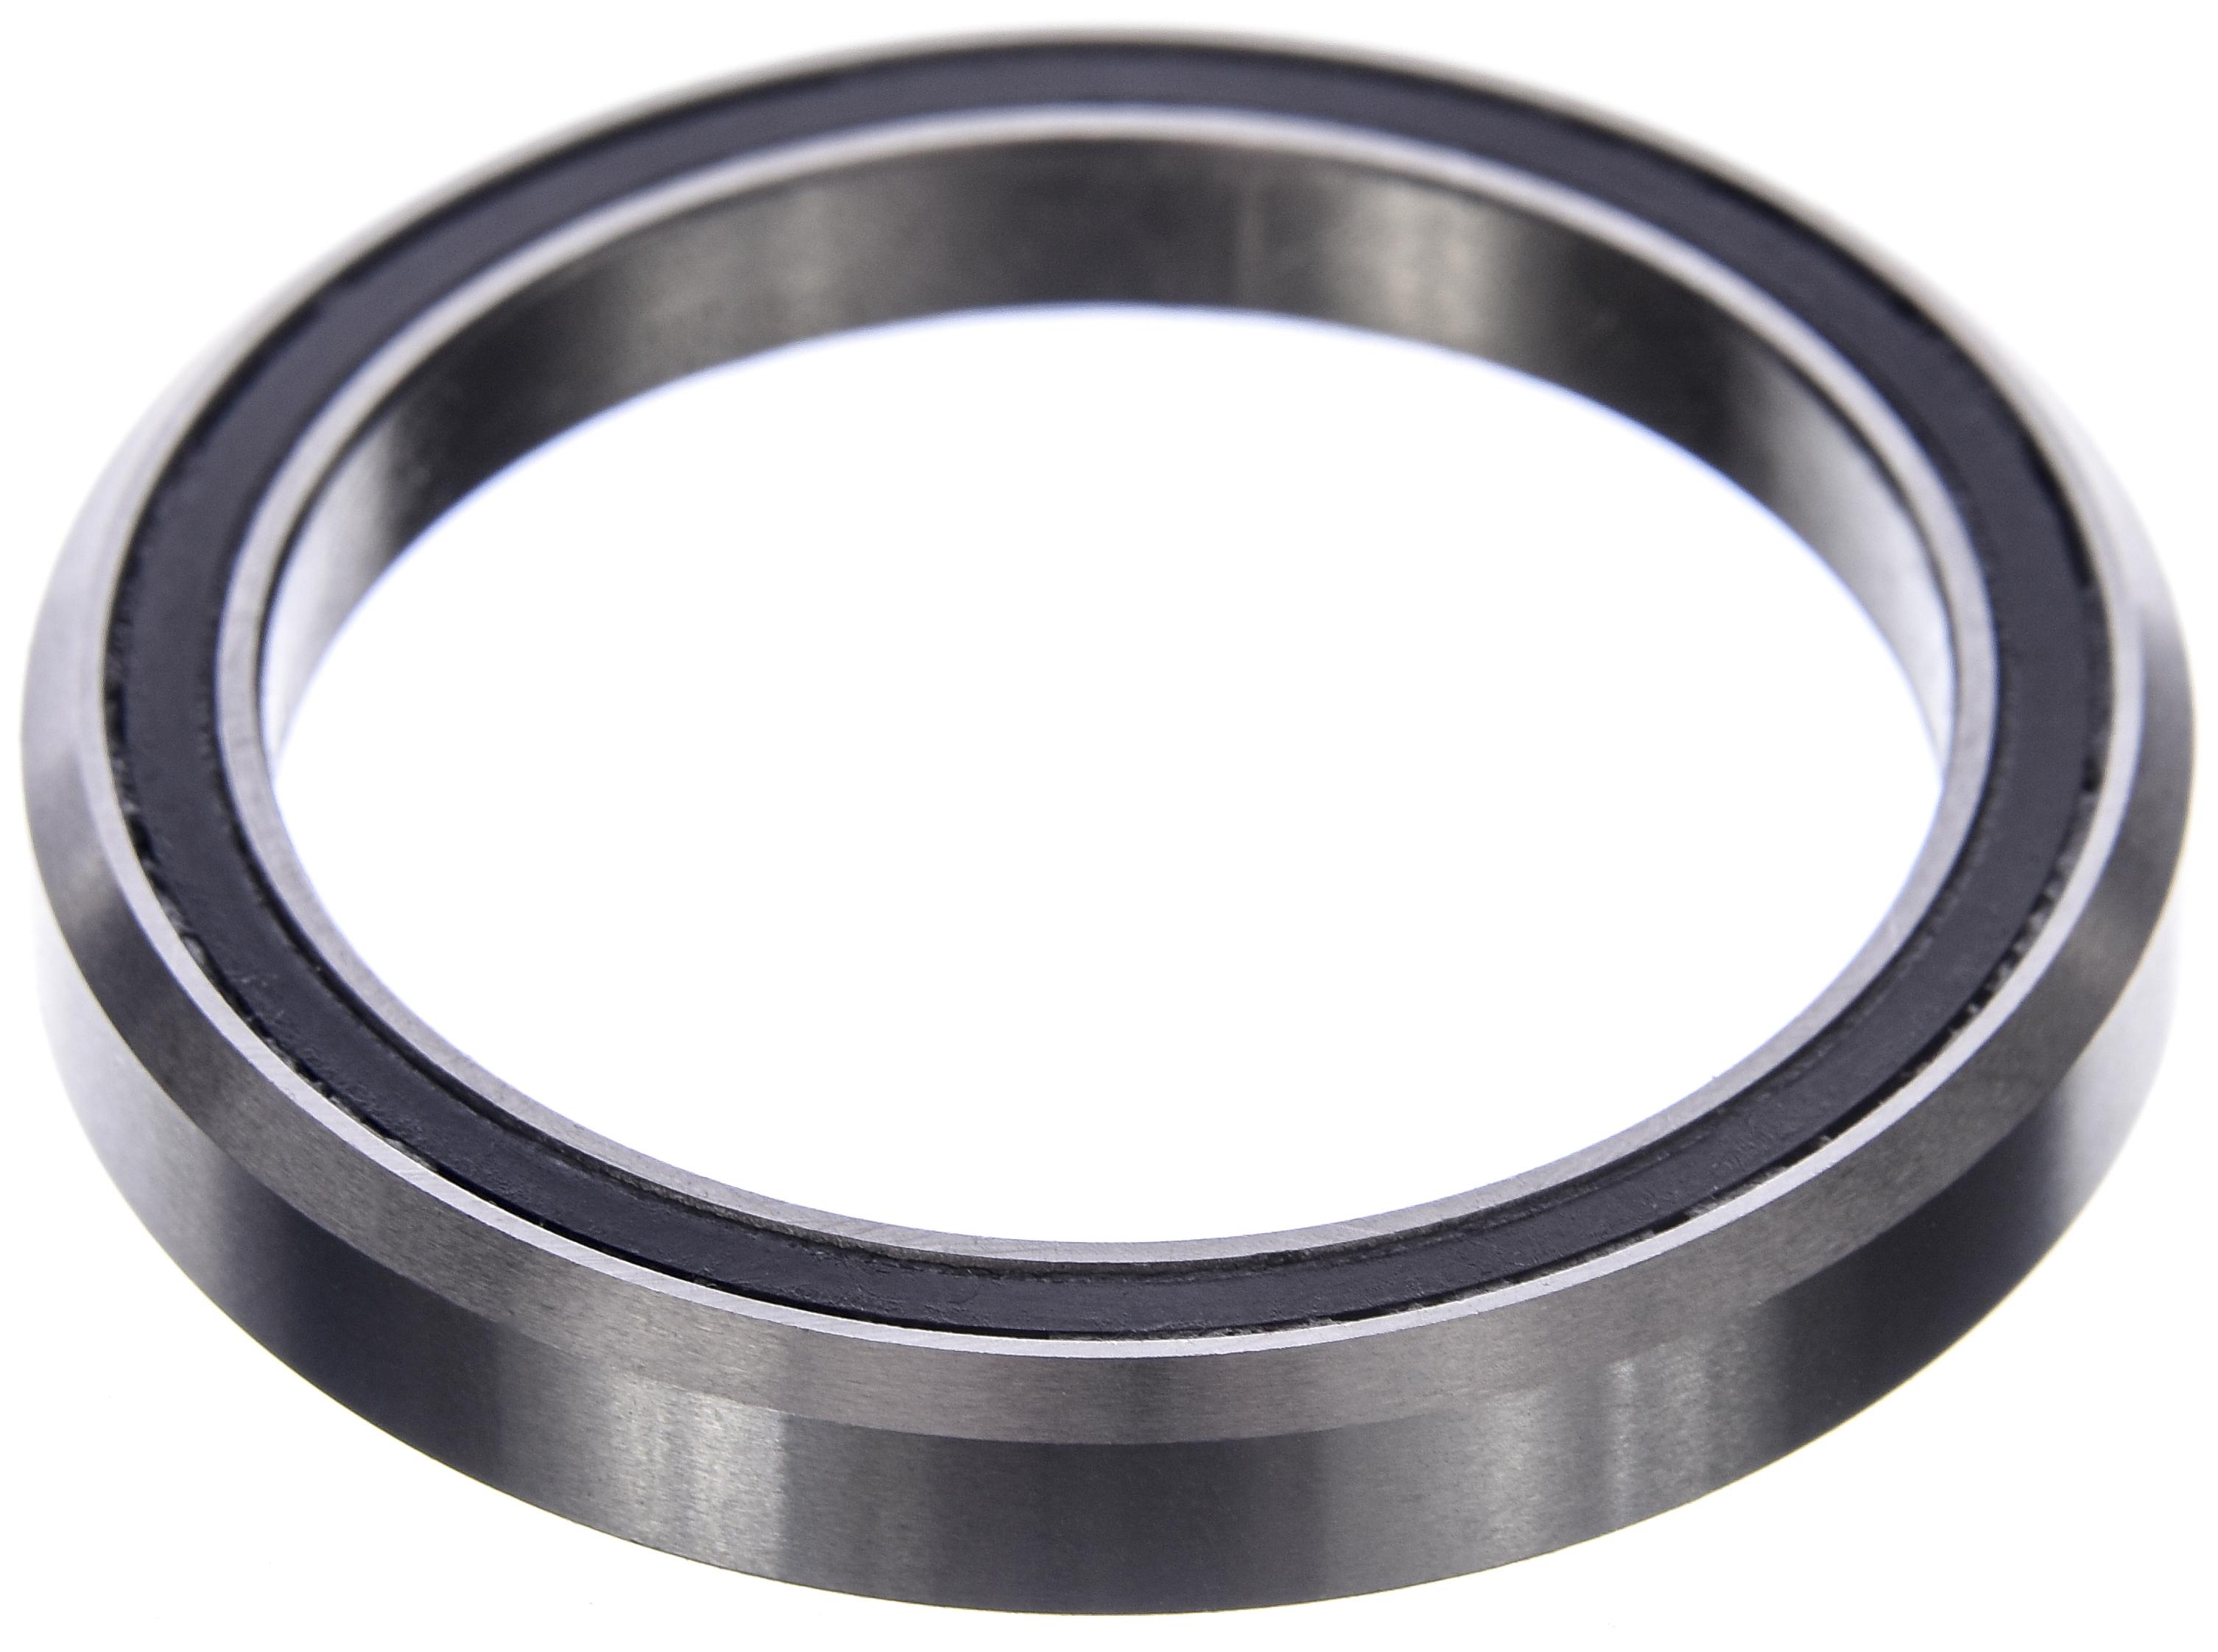 Nukeproof Replacement Zs66 Headset Bearing - Black